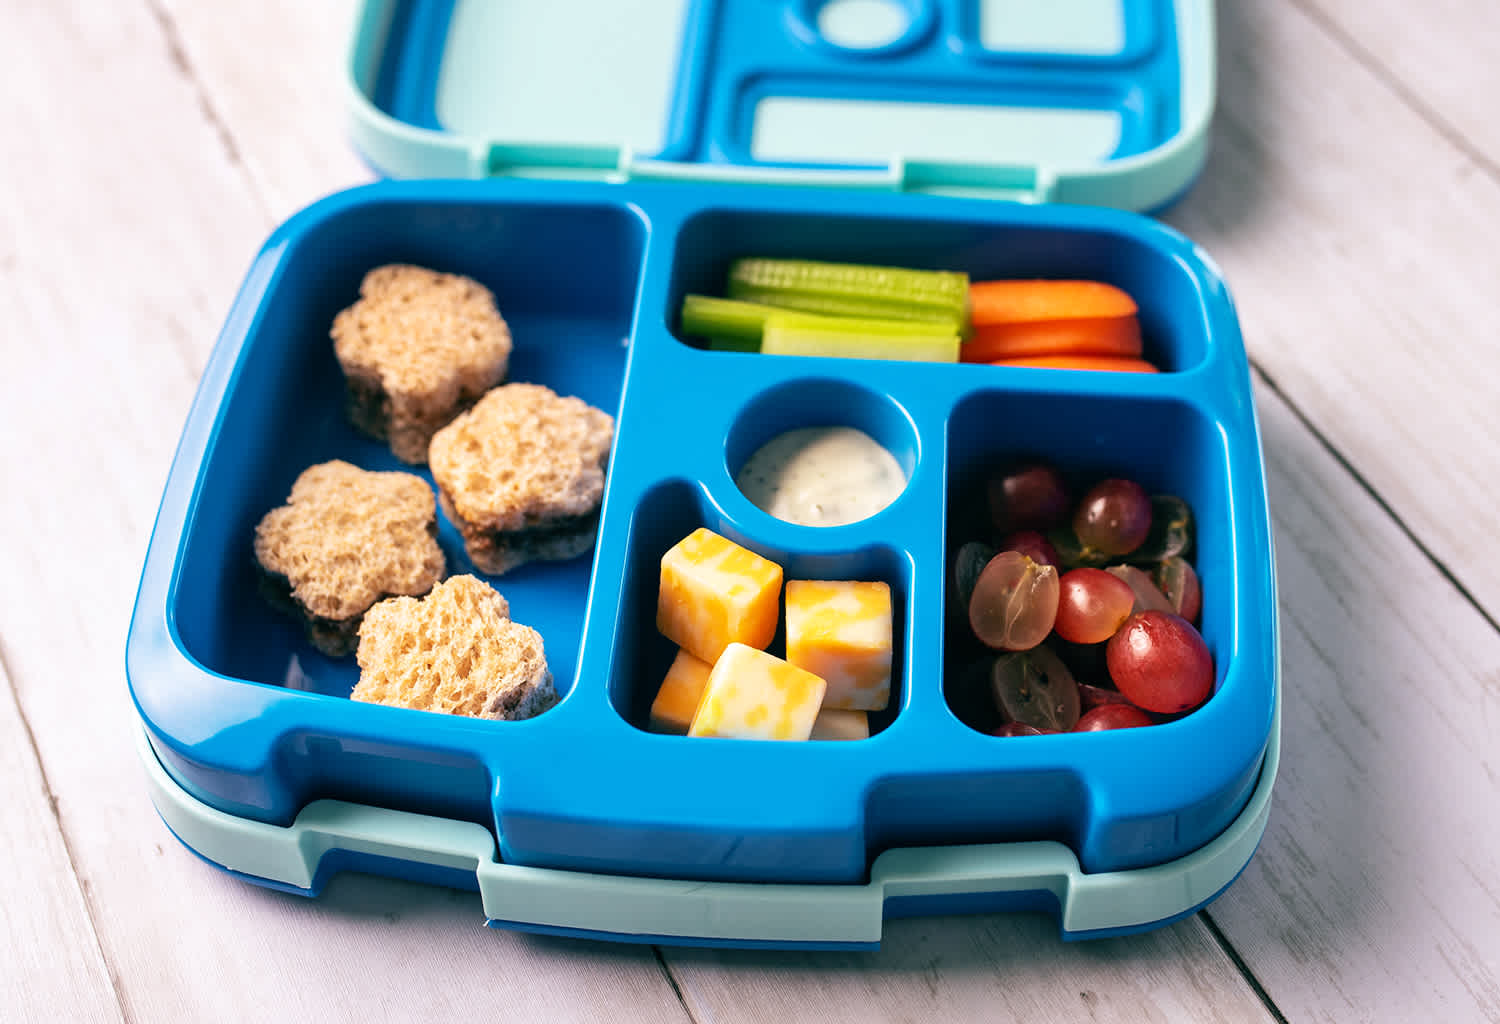 School Lunches: 18 Of The Best Lunchboxes And Snacks To Make Your